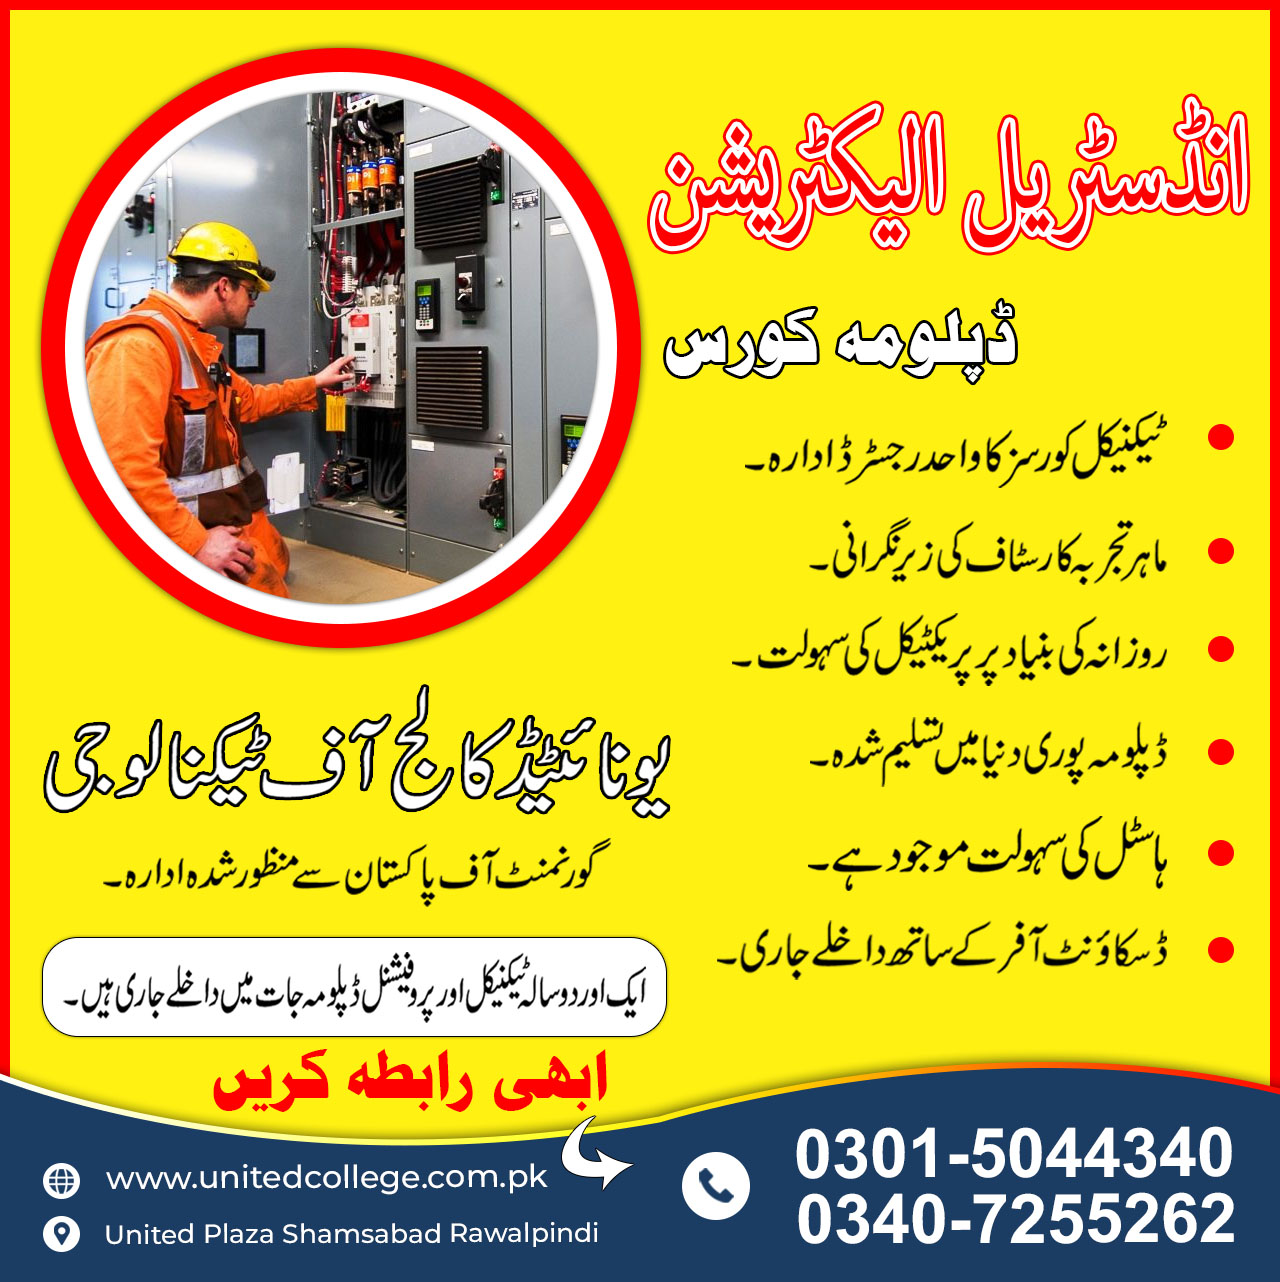 INDUSTRIAL ELECTRICIAN Course